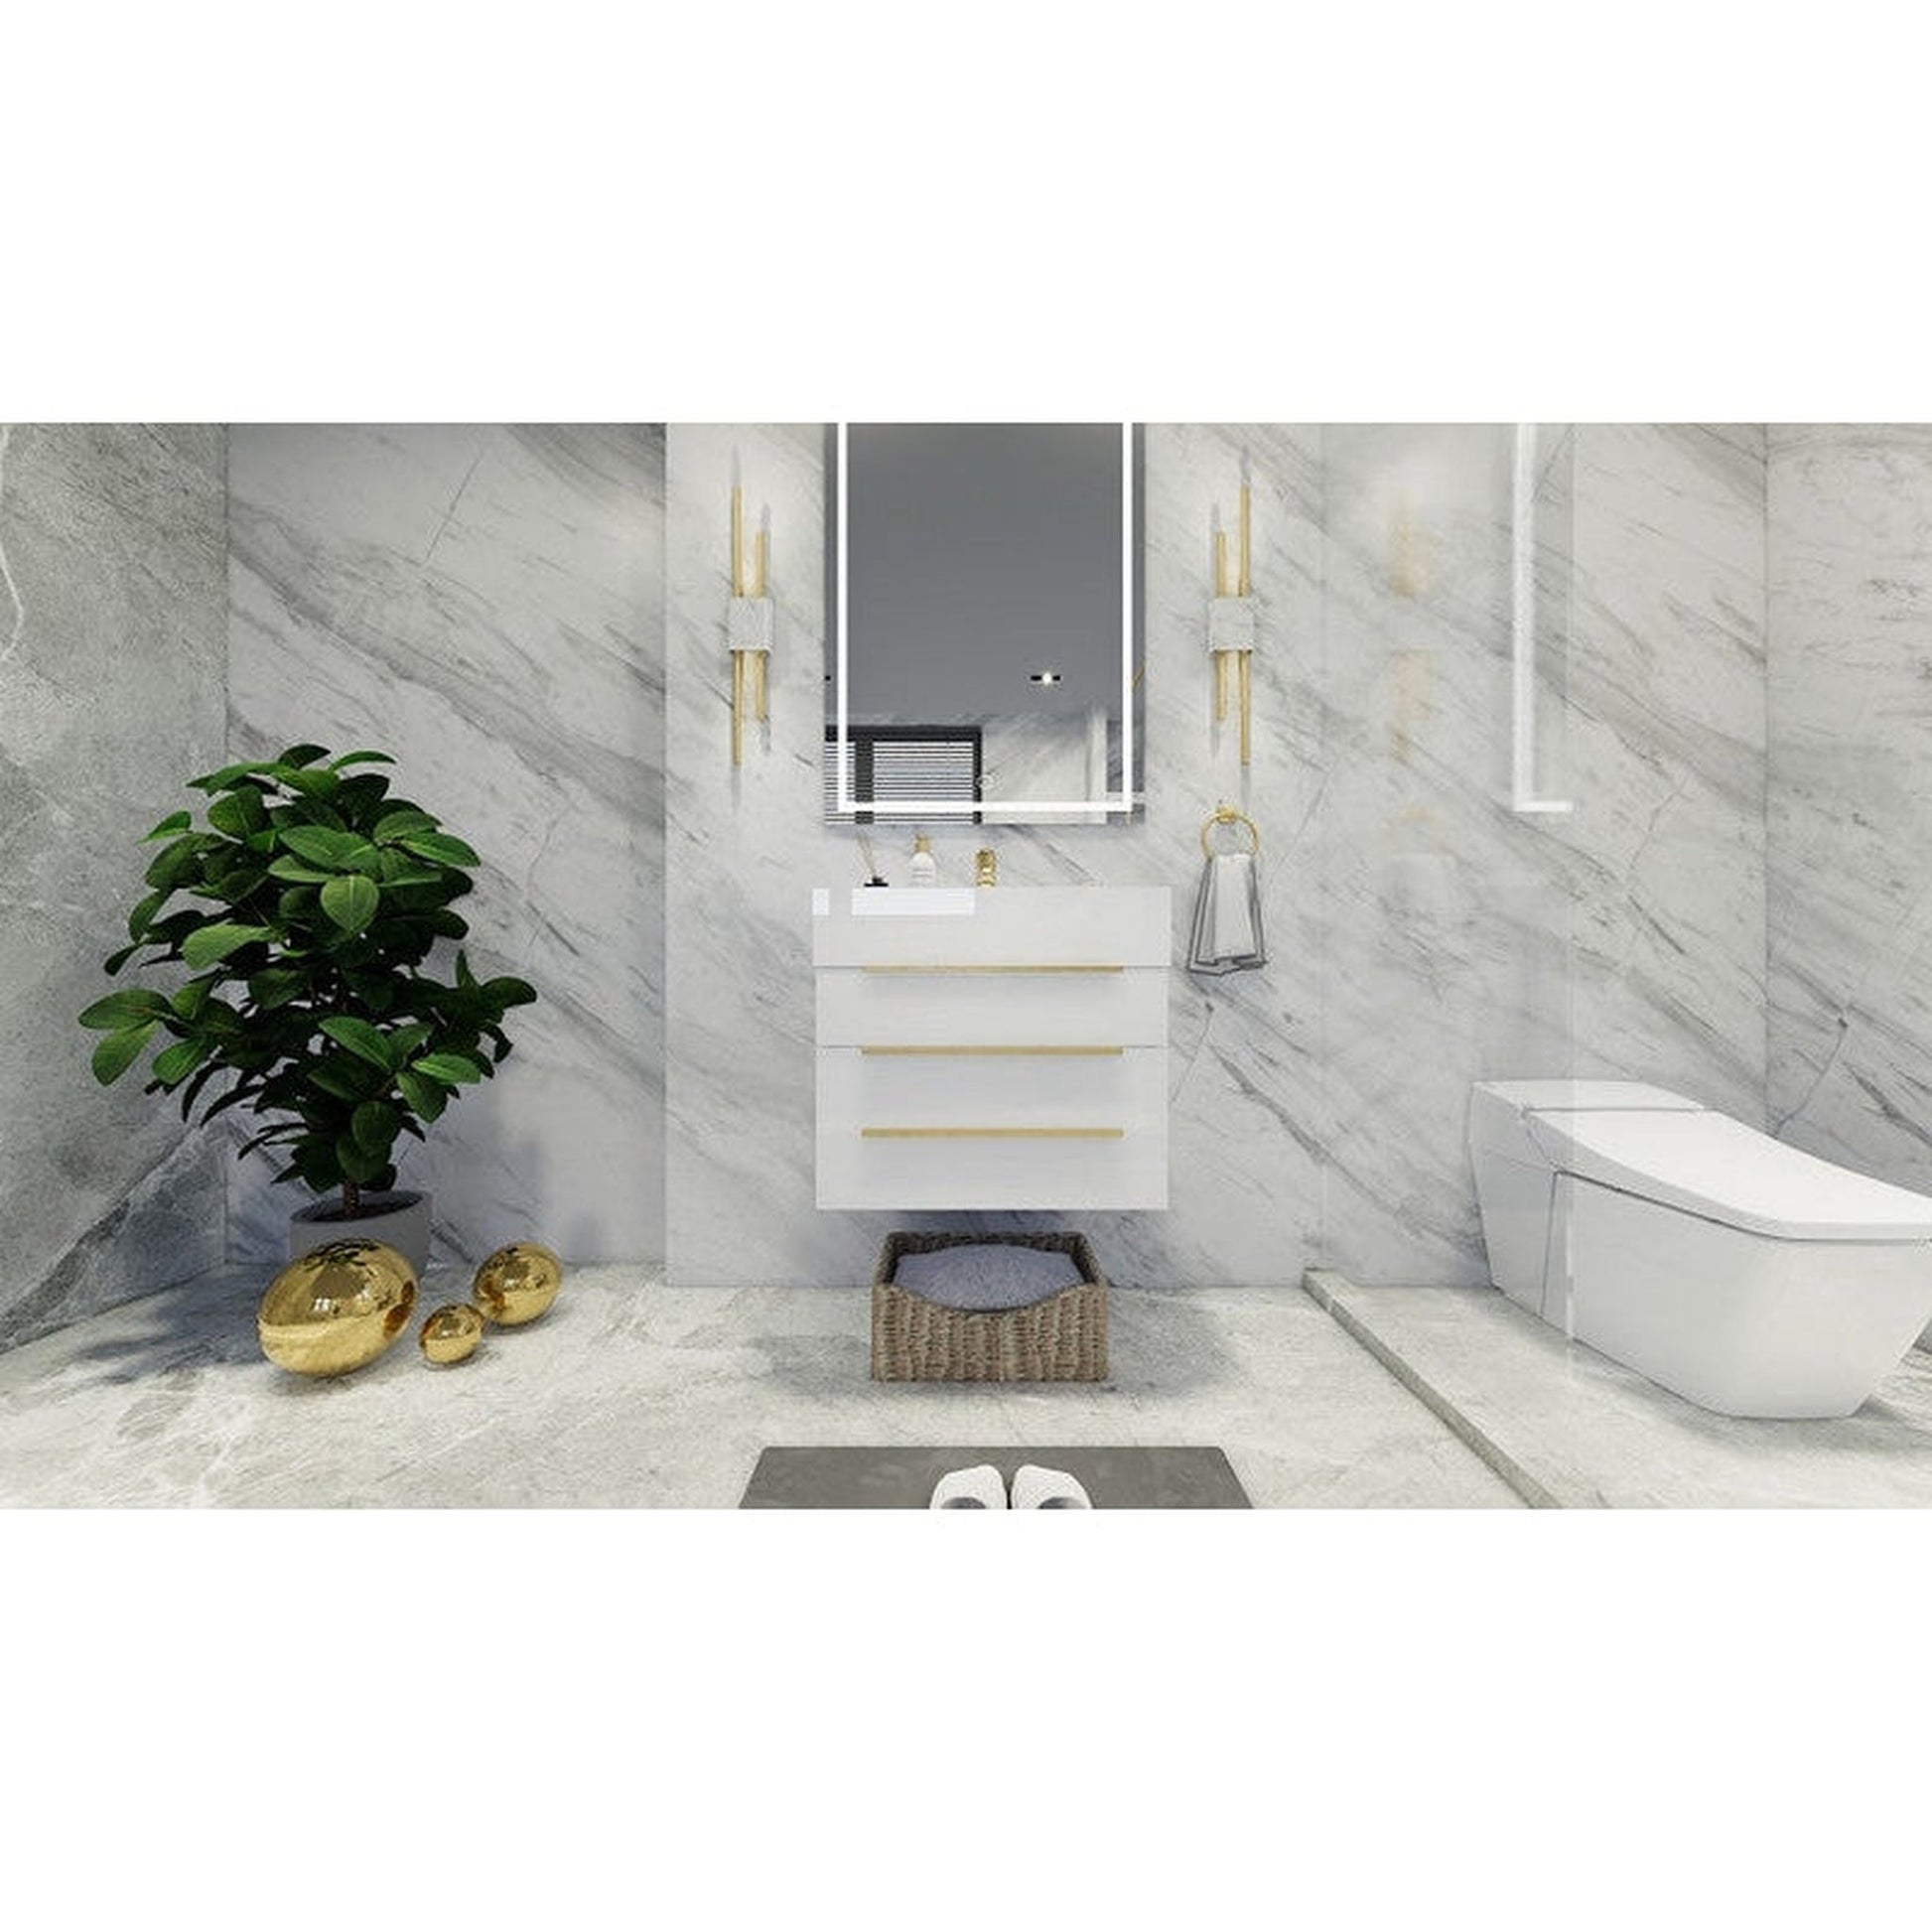 Moreno Bath Bethany 24" High Gloss White Wall-Mounted Vanity With Single Reinforced White Acrylic Sink